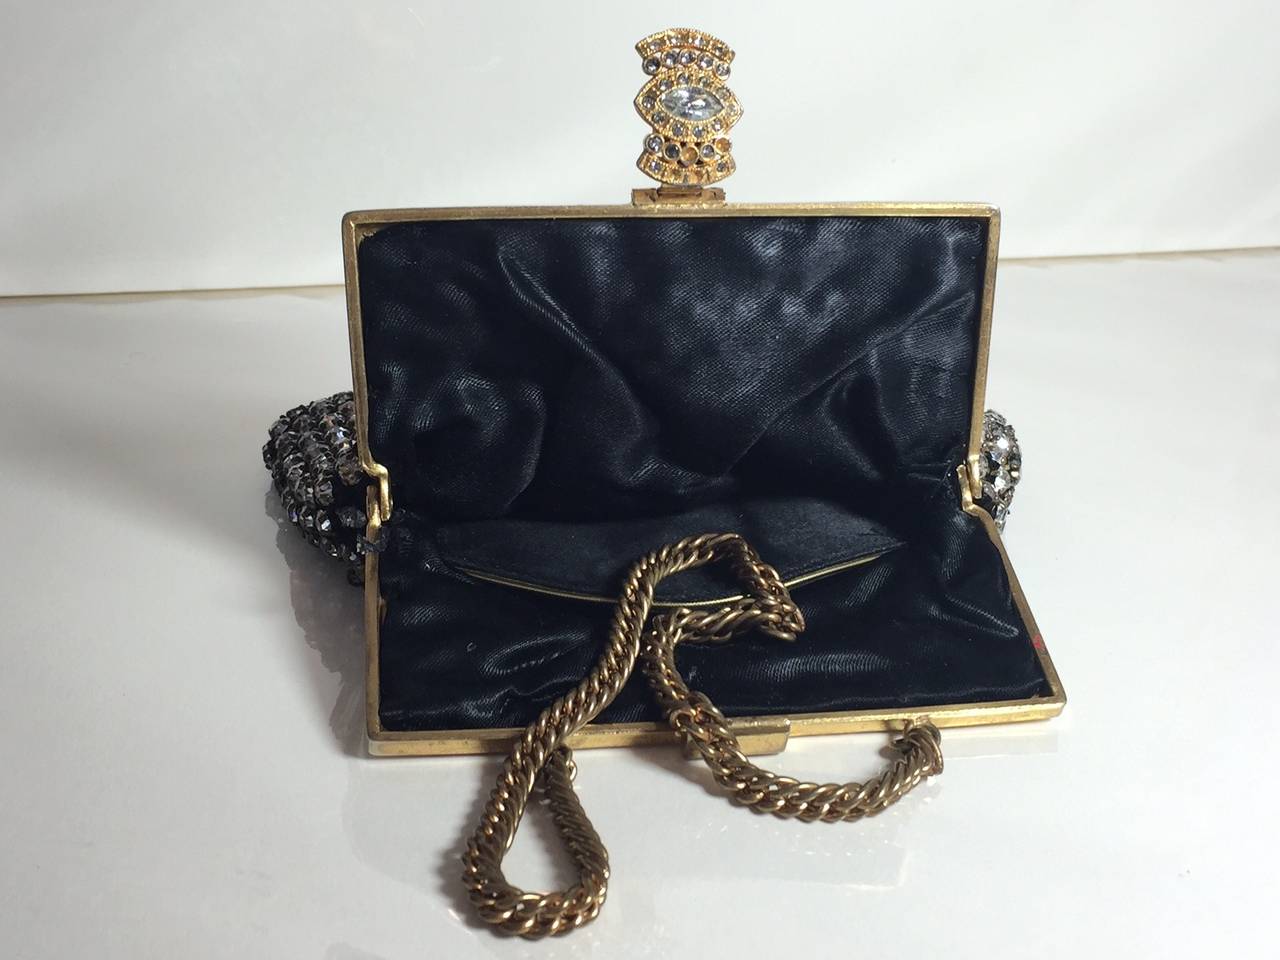 A beautiful 1930s Art Deco black mesh and rhinestone evening bag with brass frame and chain as well as a rhinestone jeweled clasp. Lined in black satin and in excellent condition. 

Frame opening measures 4